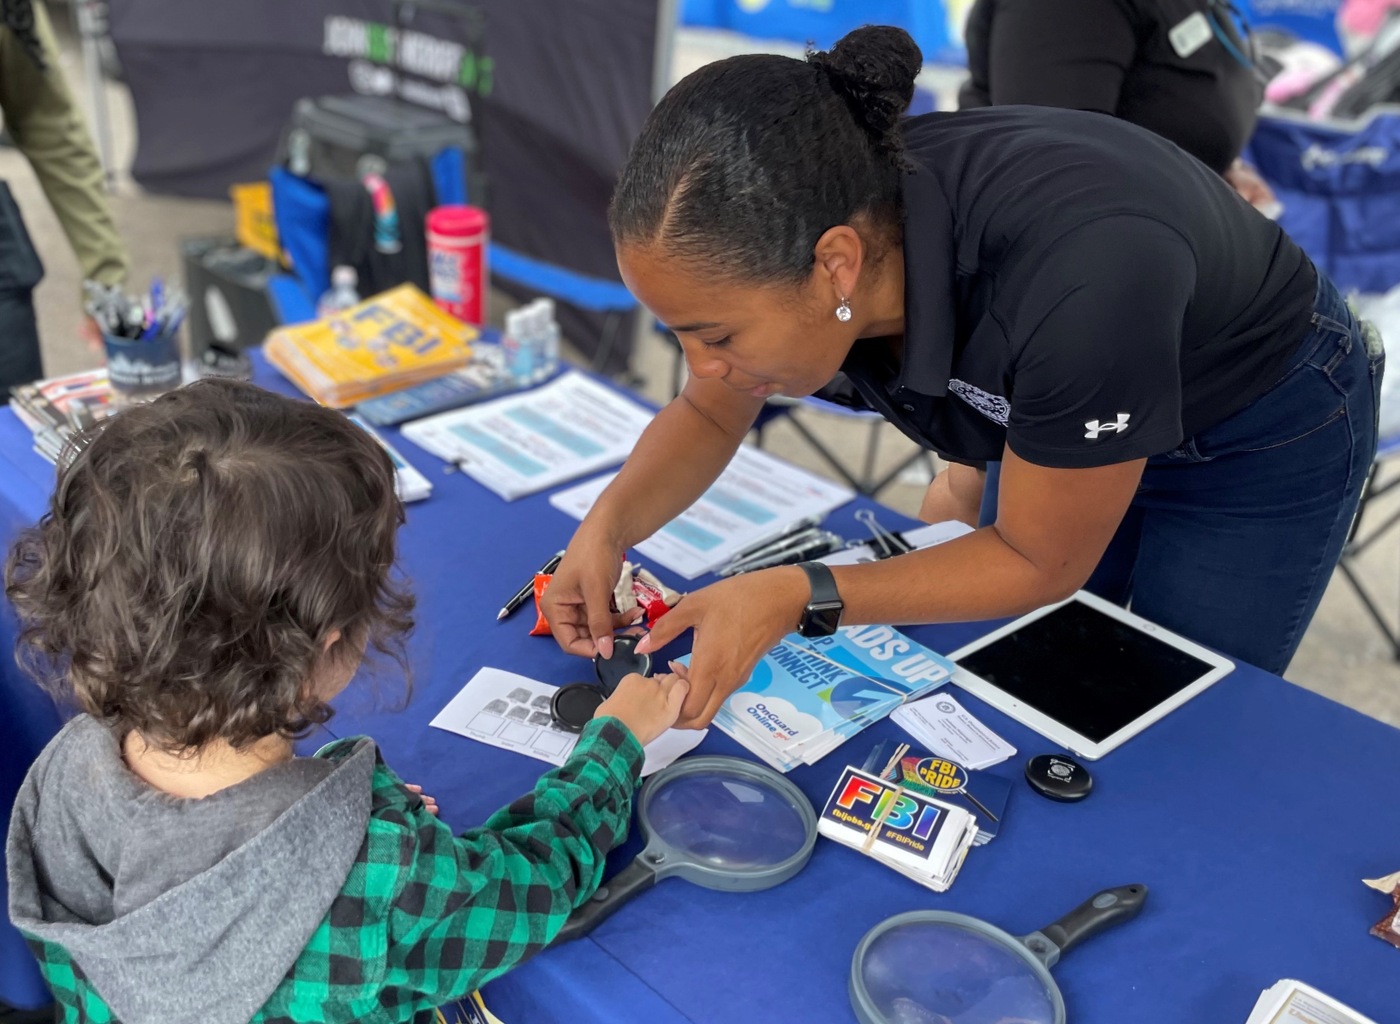 FBI San Diego employee learns over table helping a small child learn how to take fingerprints.